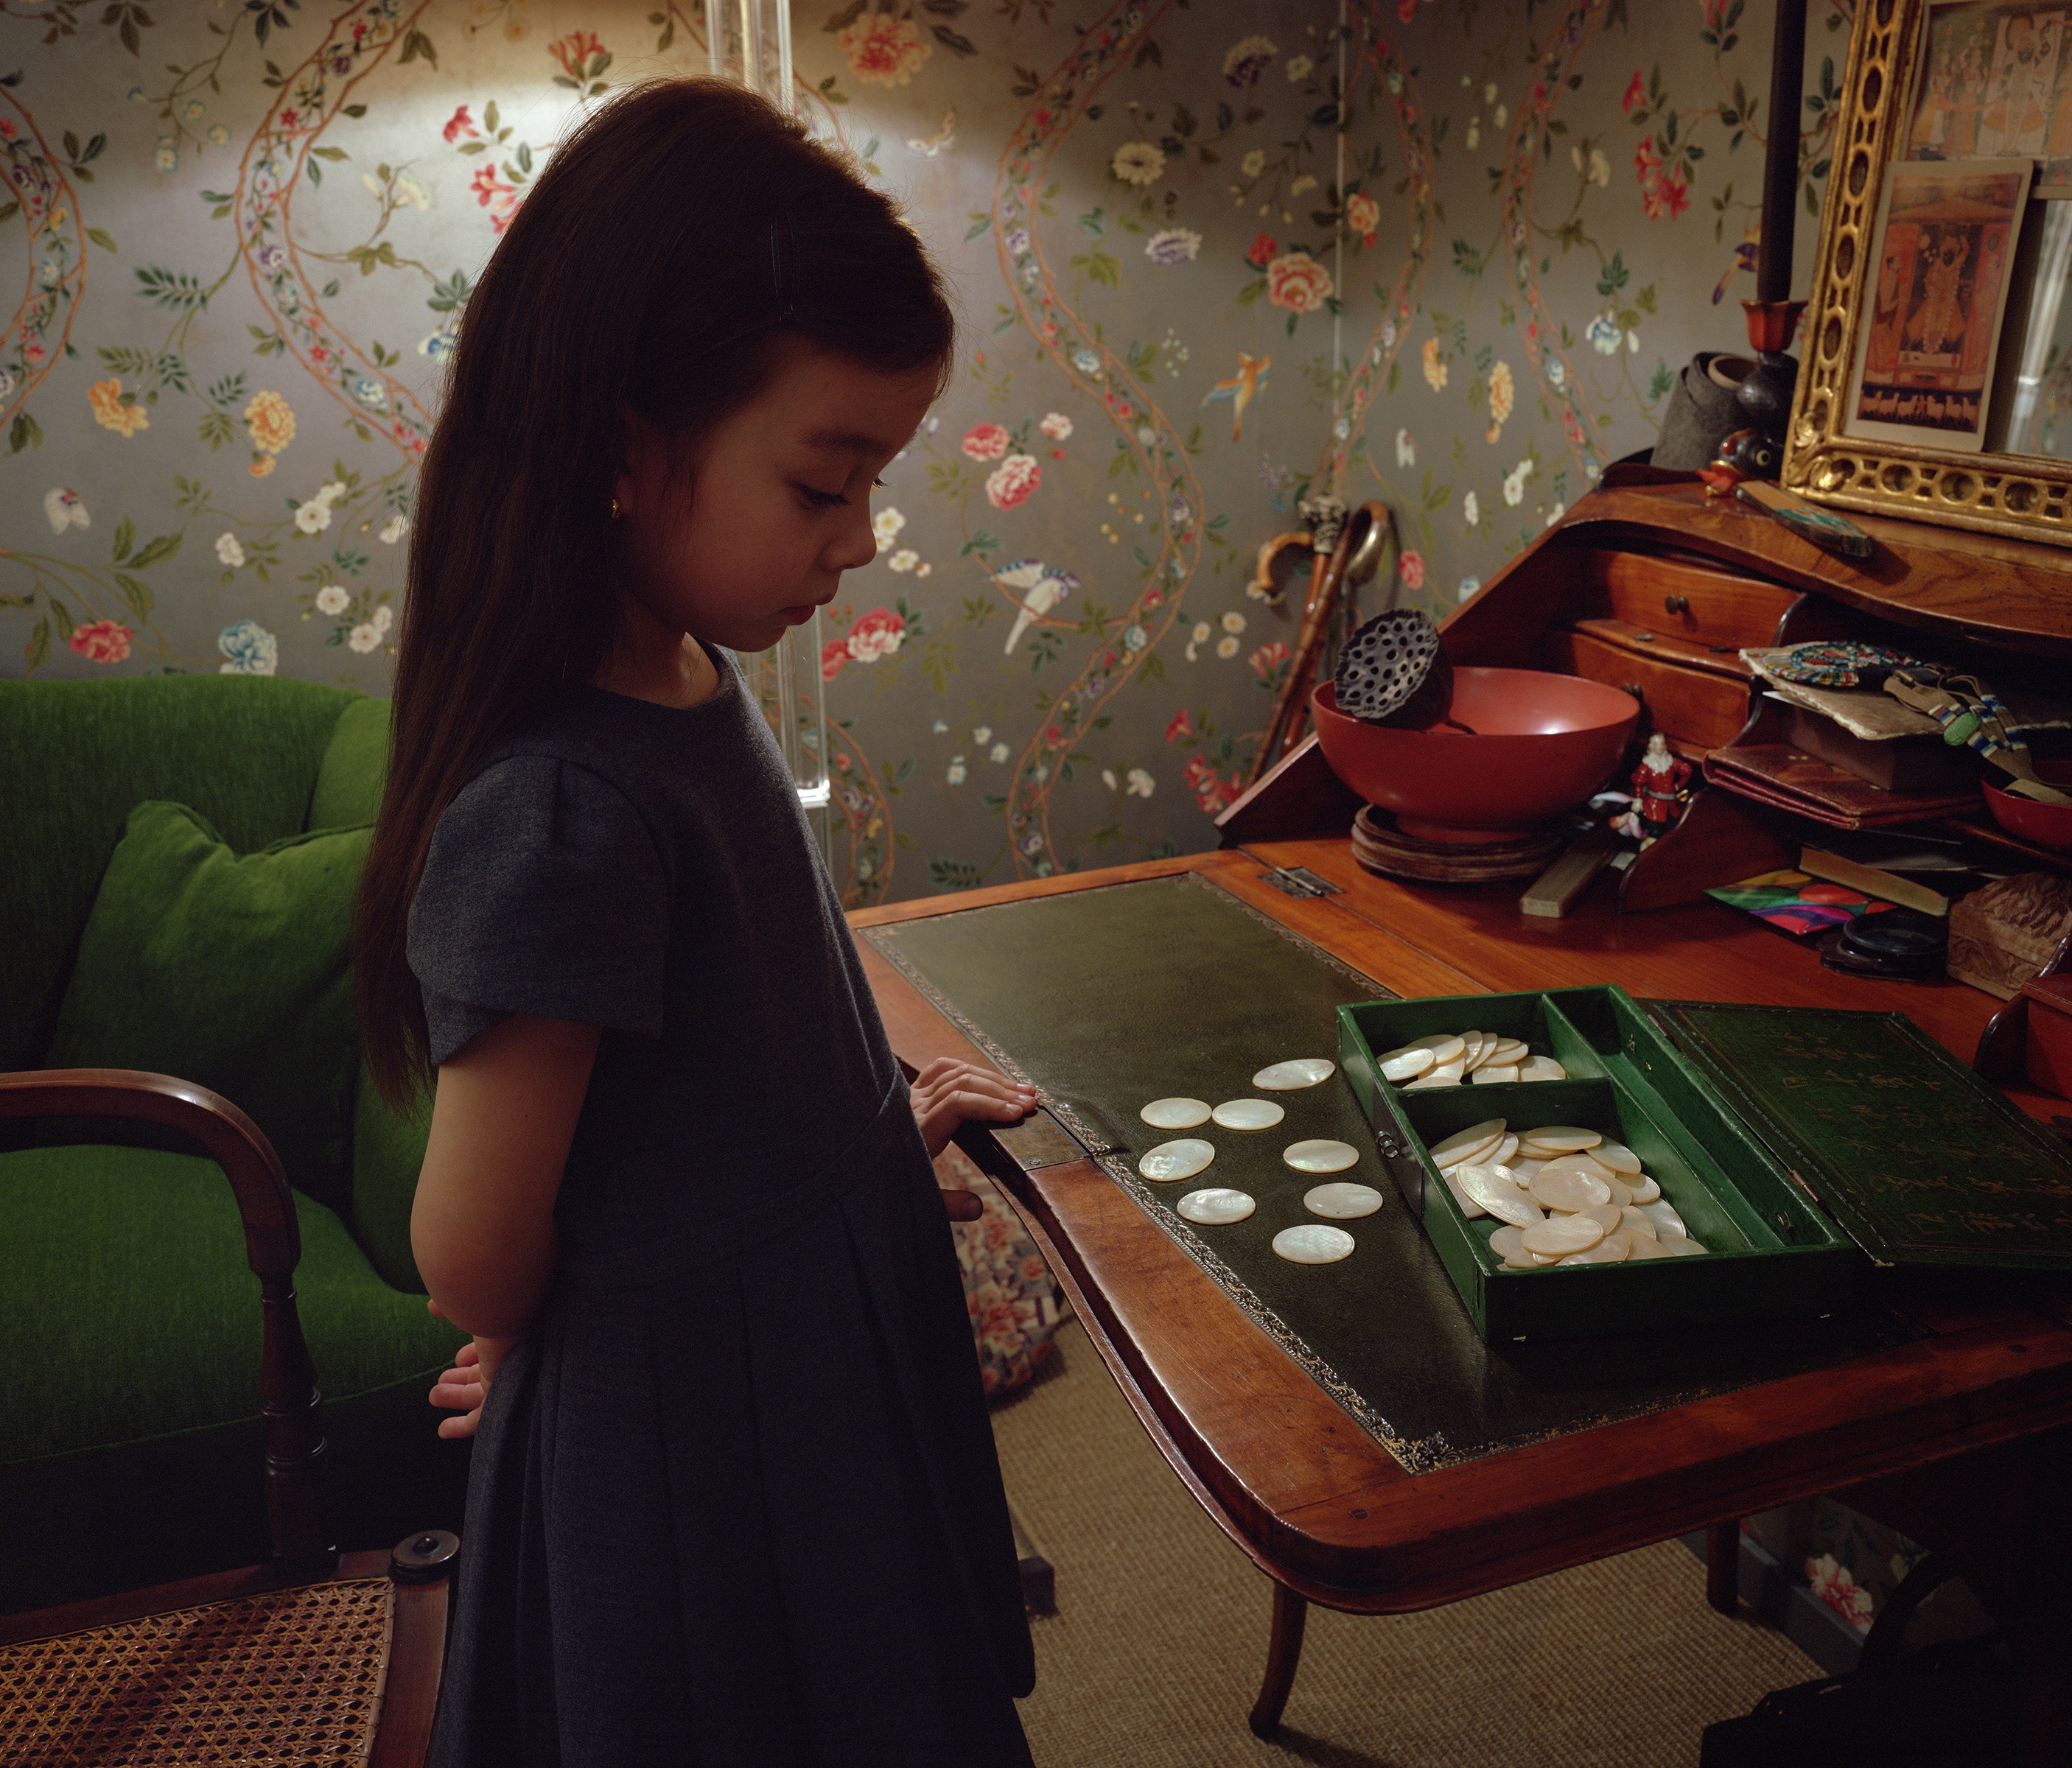 Jeff Wall, _Mother of pearl_, 2016. Inkjet print, 23.625 x 27.75 in. © Jeff Wall. Courtesy of the artist and Glenstone Museum.